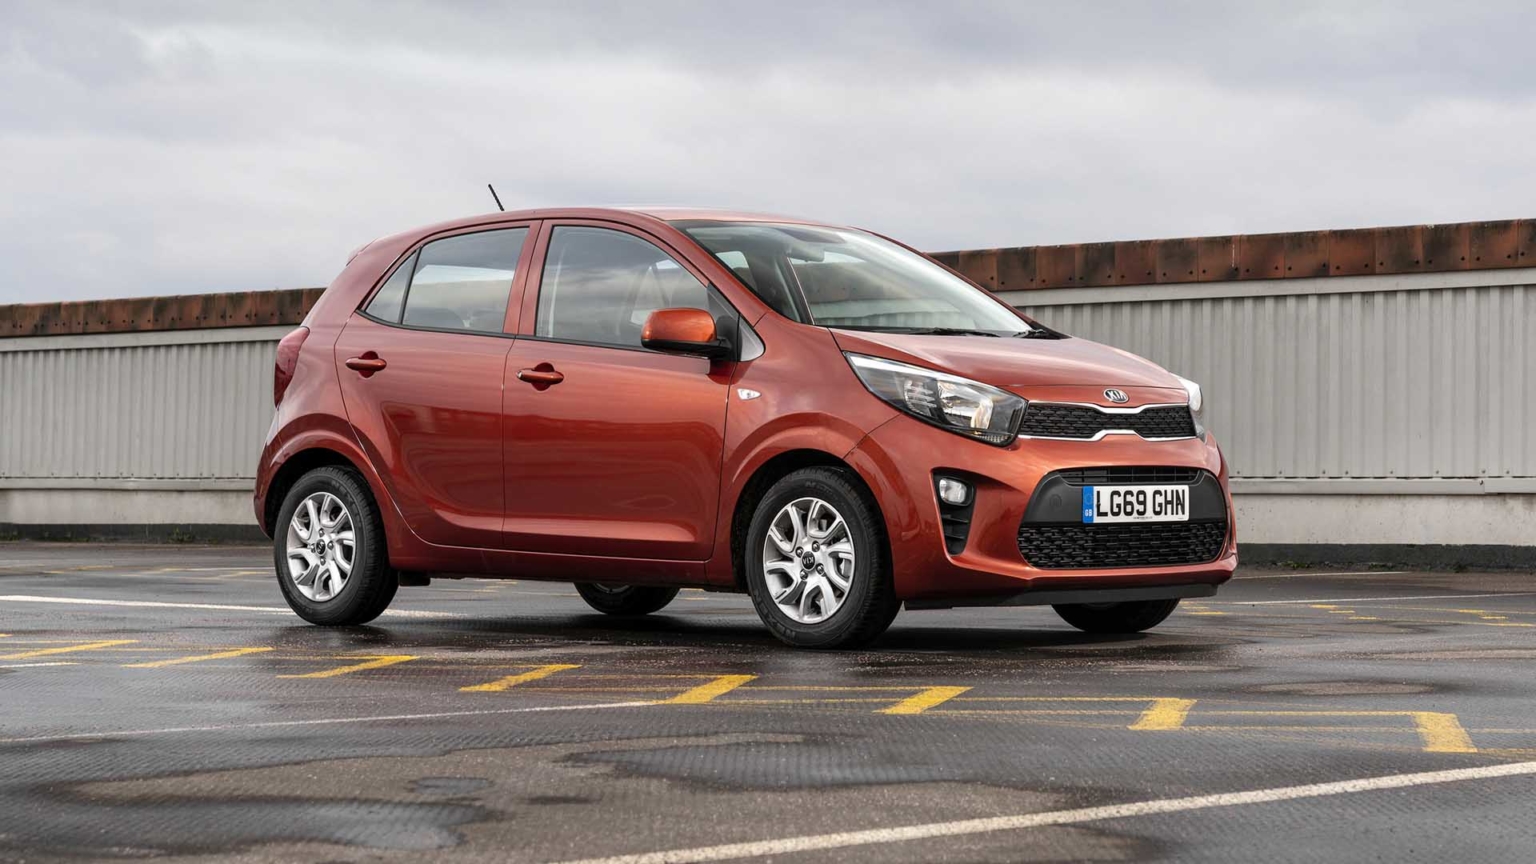 The cheapest new cars on sale